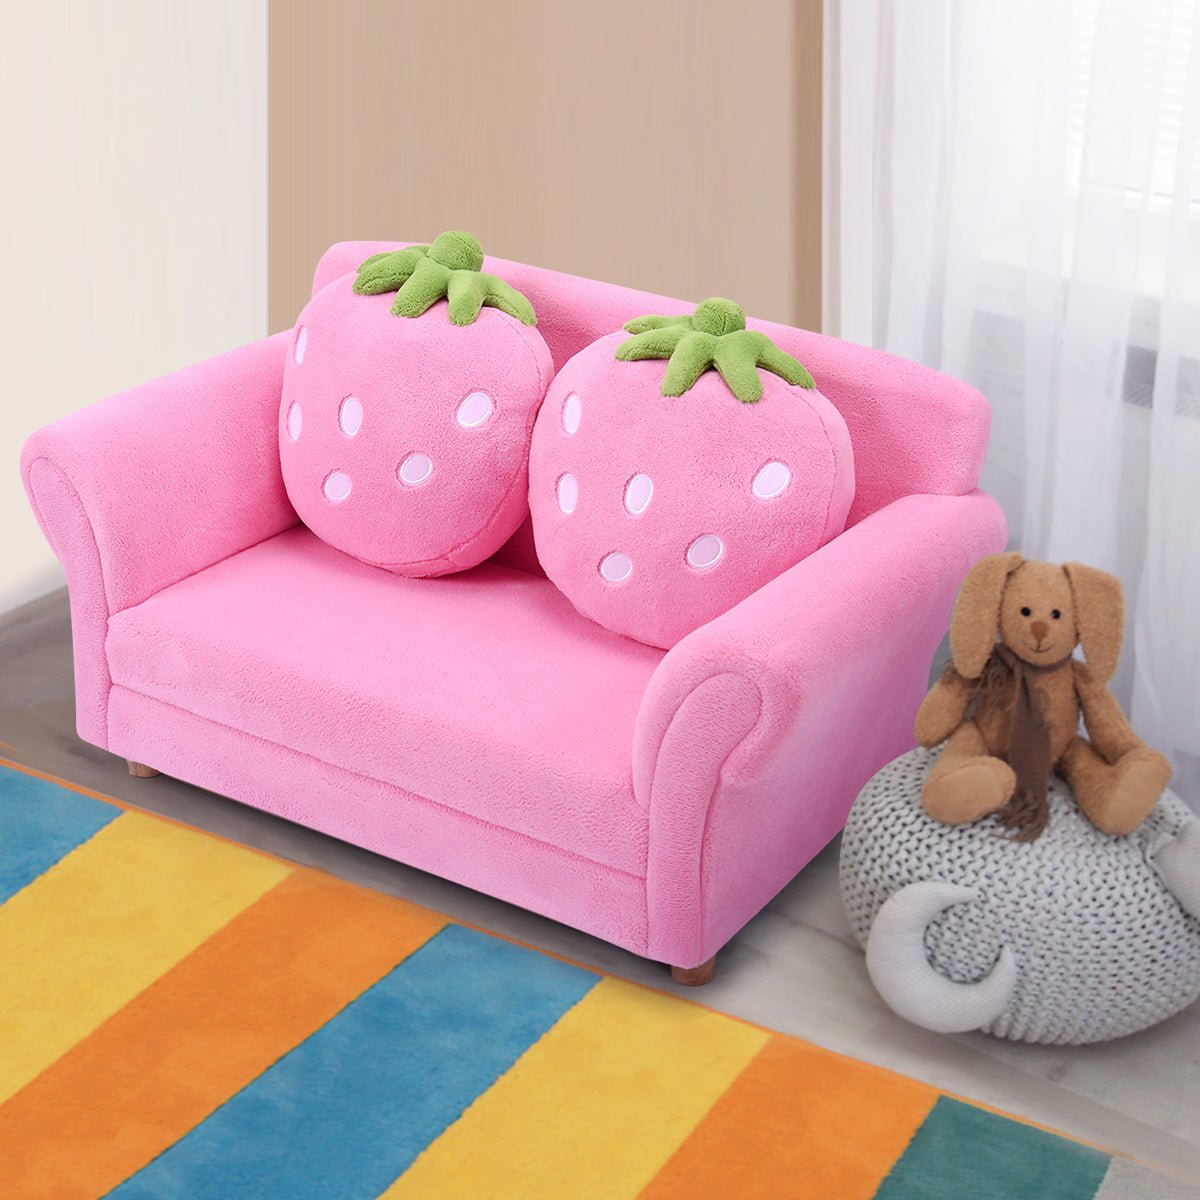 2-Seat Kids Sofa: Lounge Bed with 2 Strawberry Pillows for Coziness